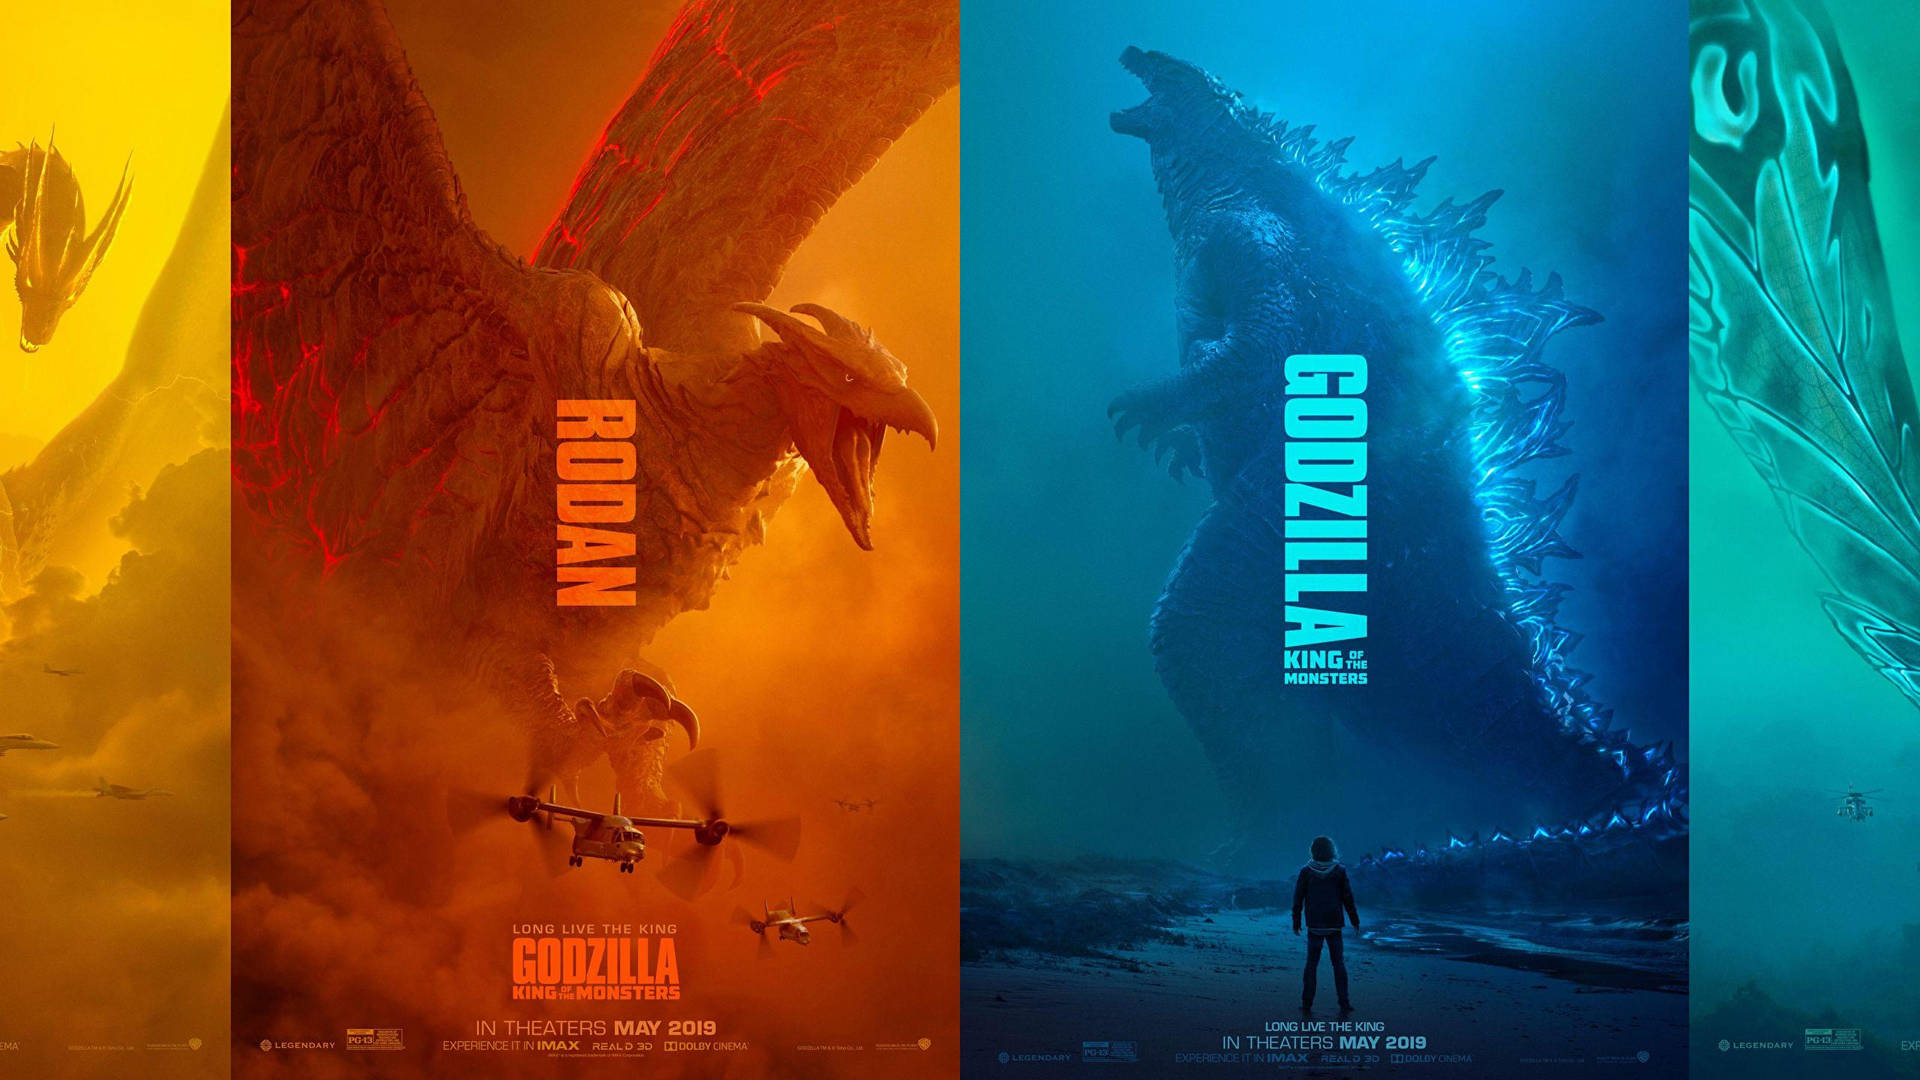 Hd Colorful Aesthetic Godzilla King Of The Monsters Background